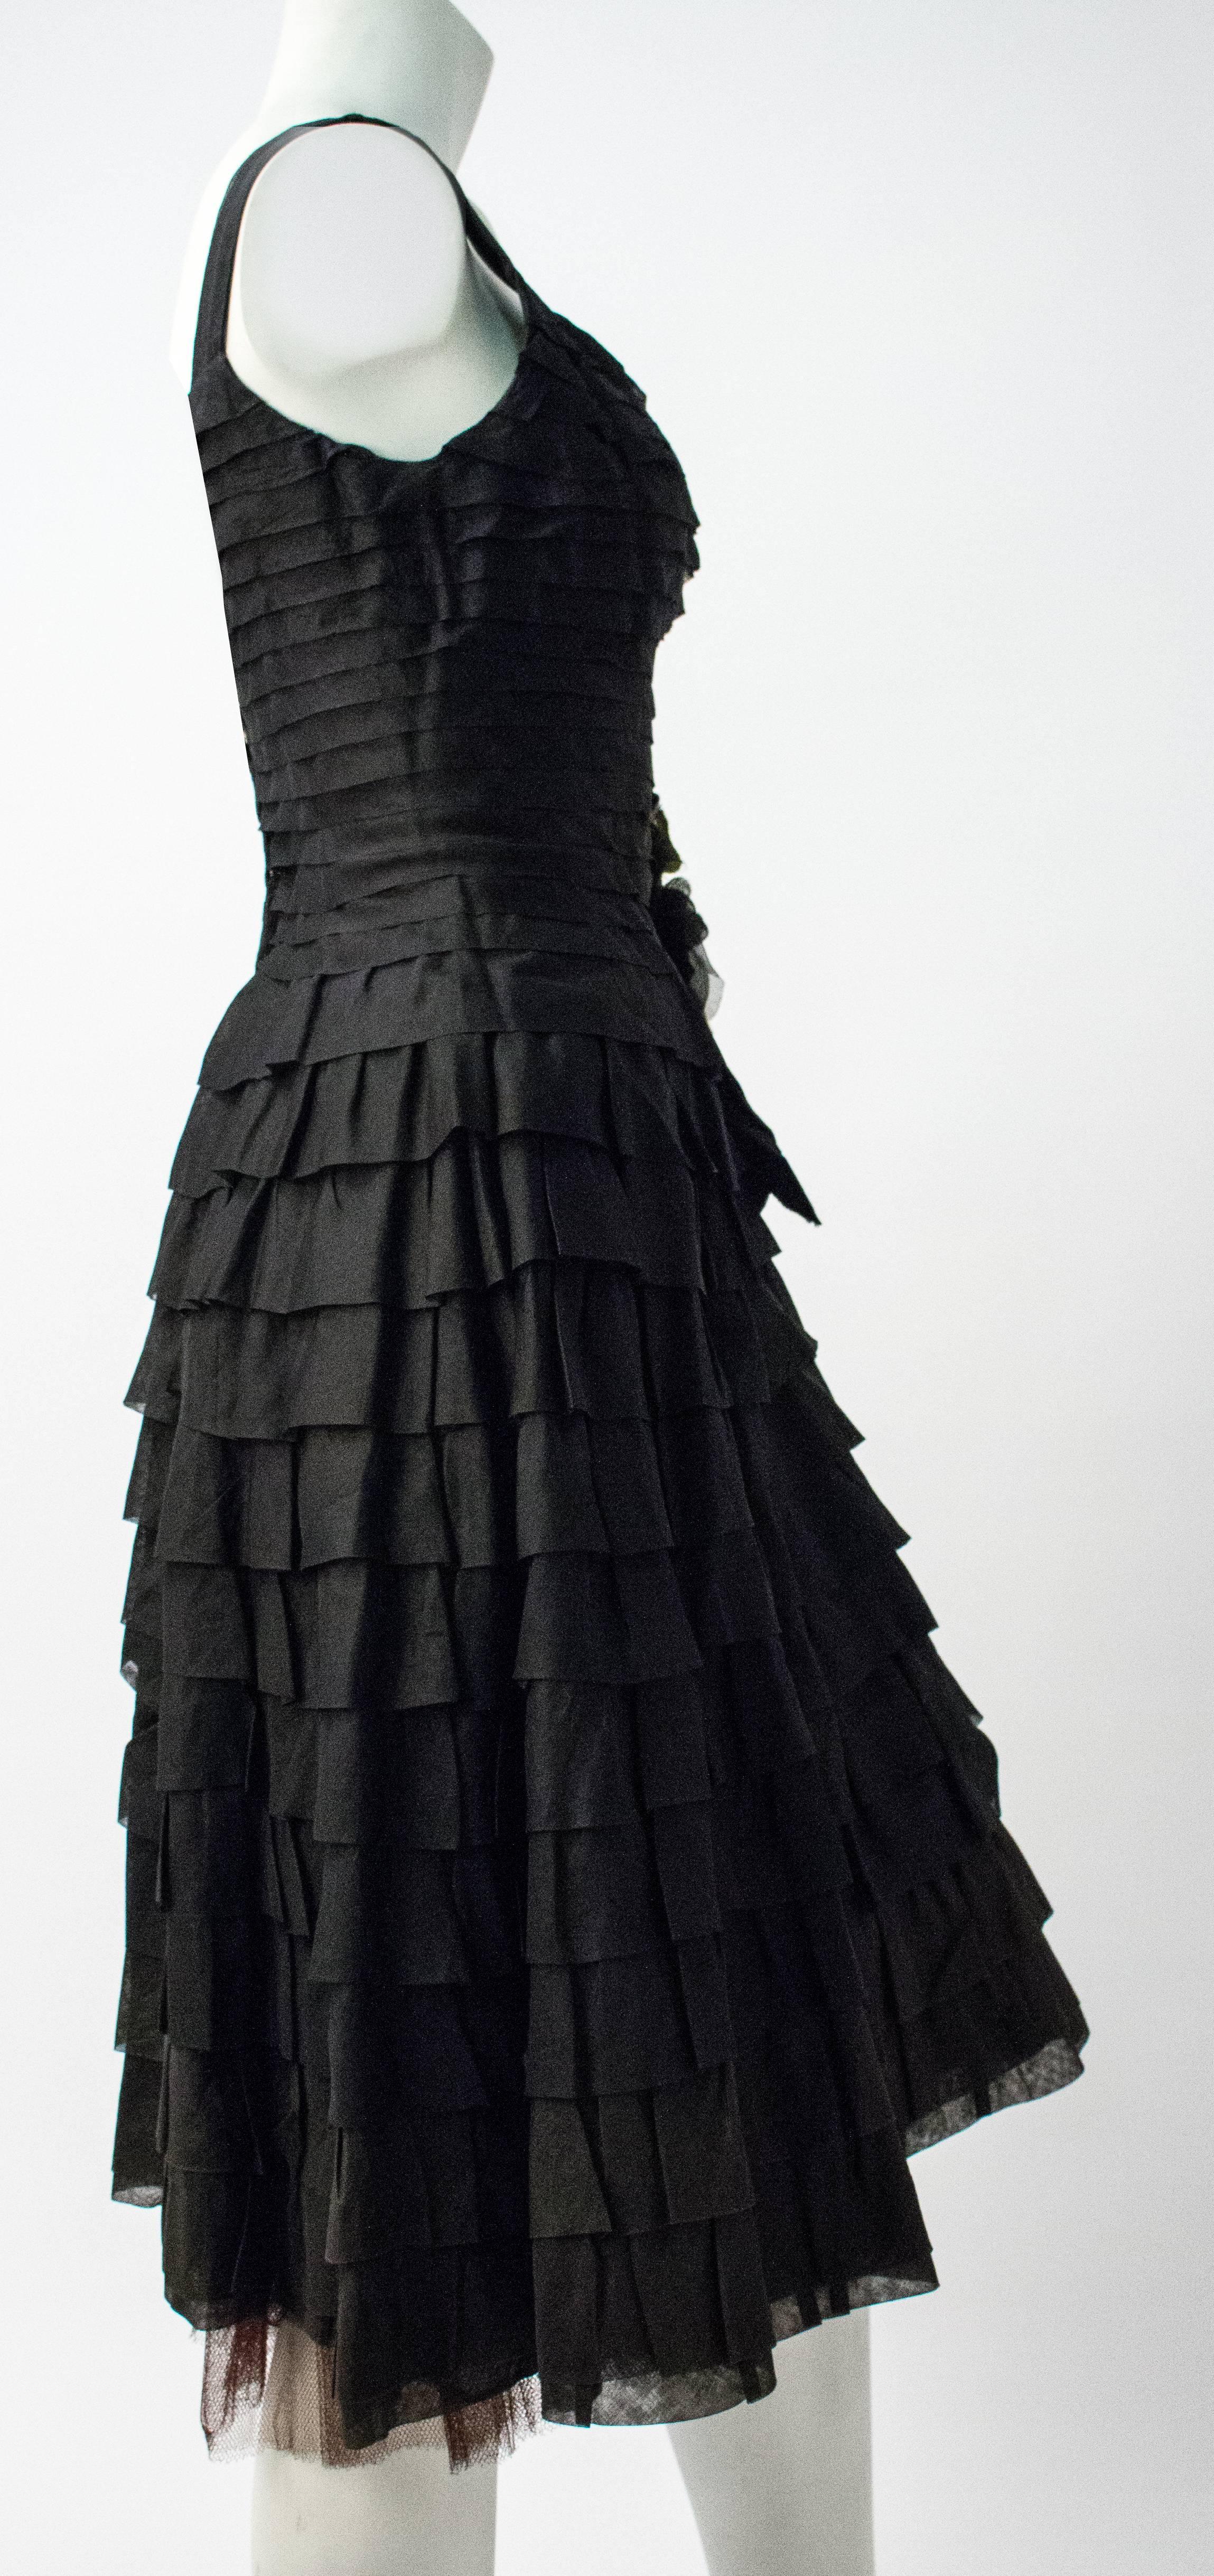 50s Emma Domb Black Chiffon Tiered Dress In Excellent Condition For Sale In San Francisco, CA